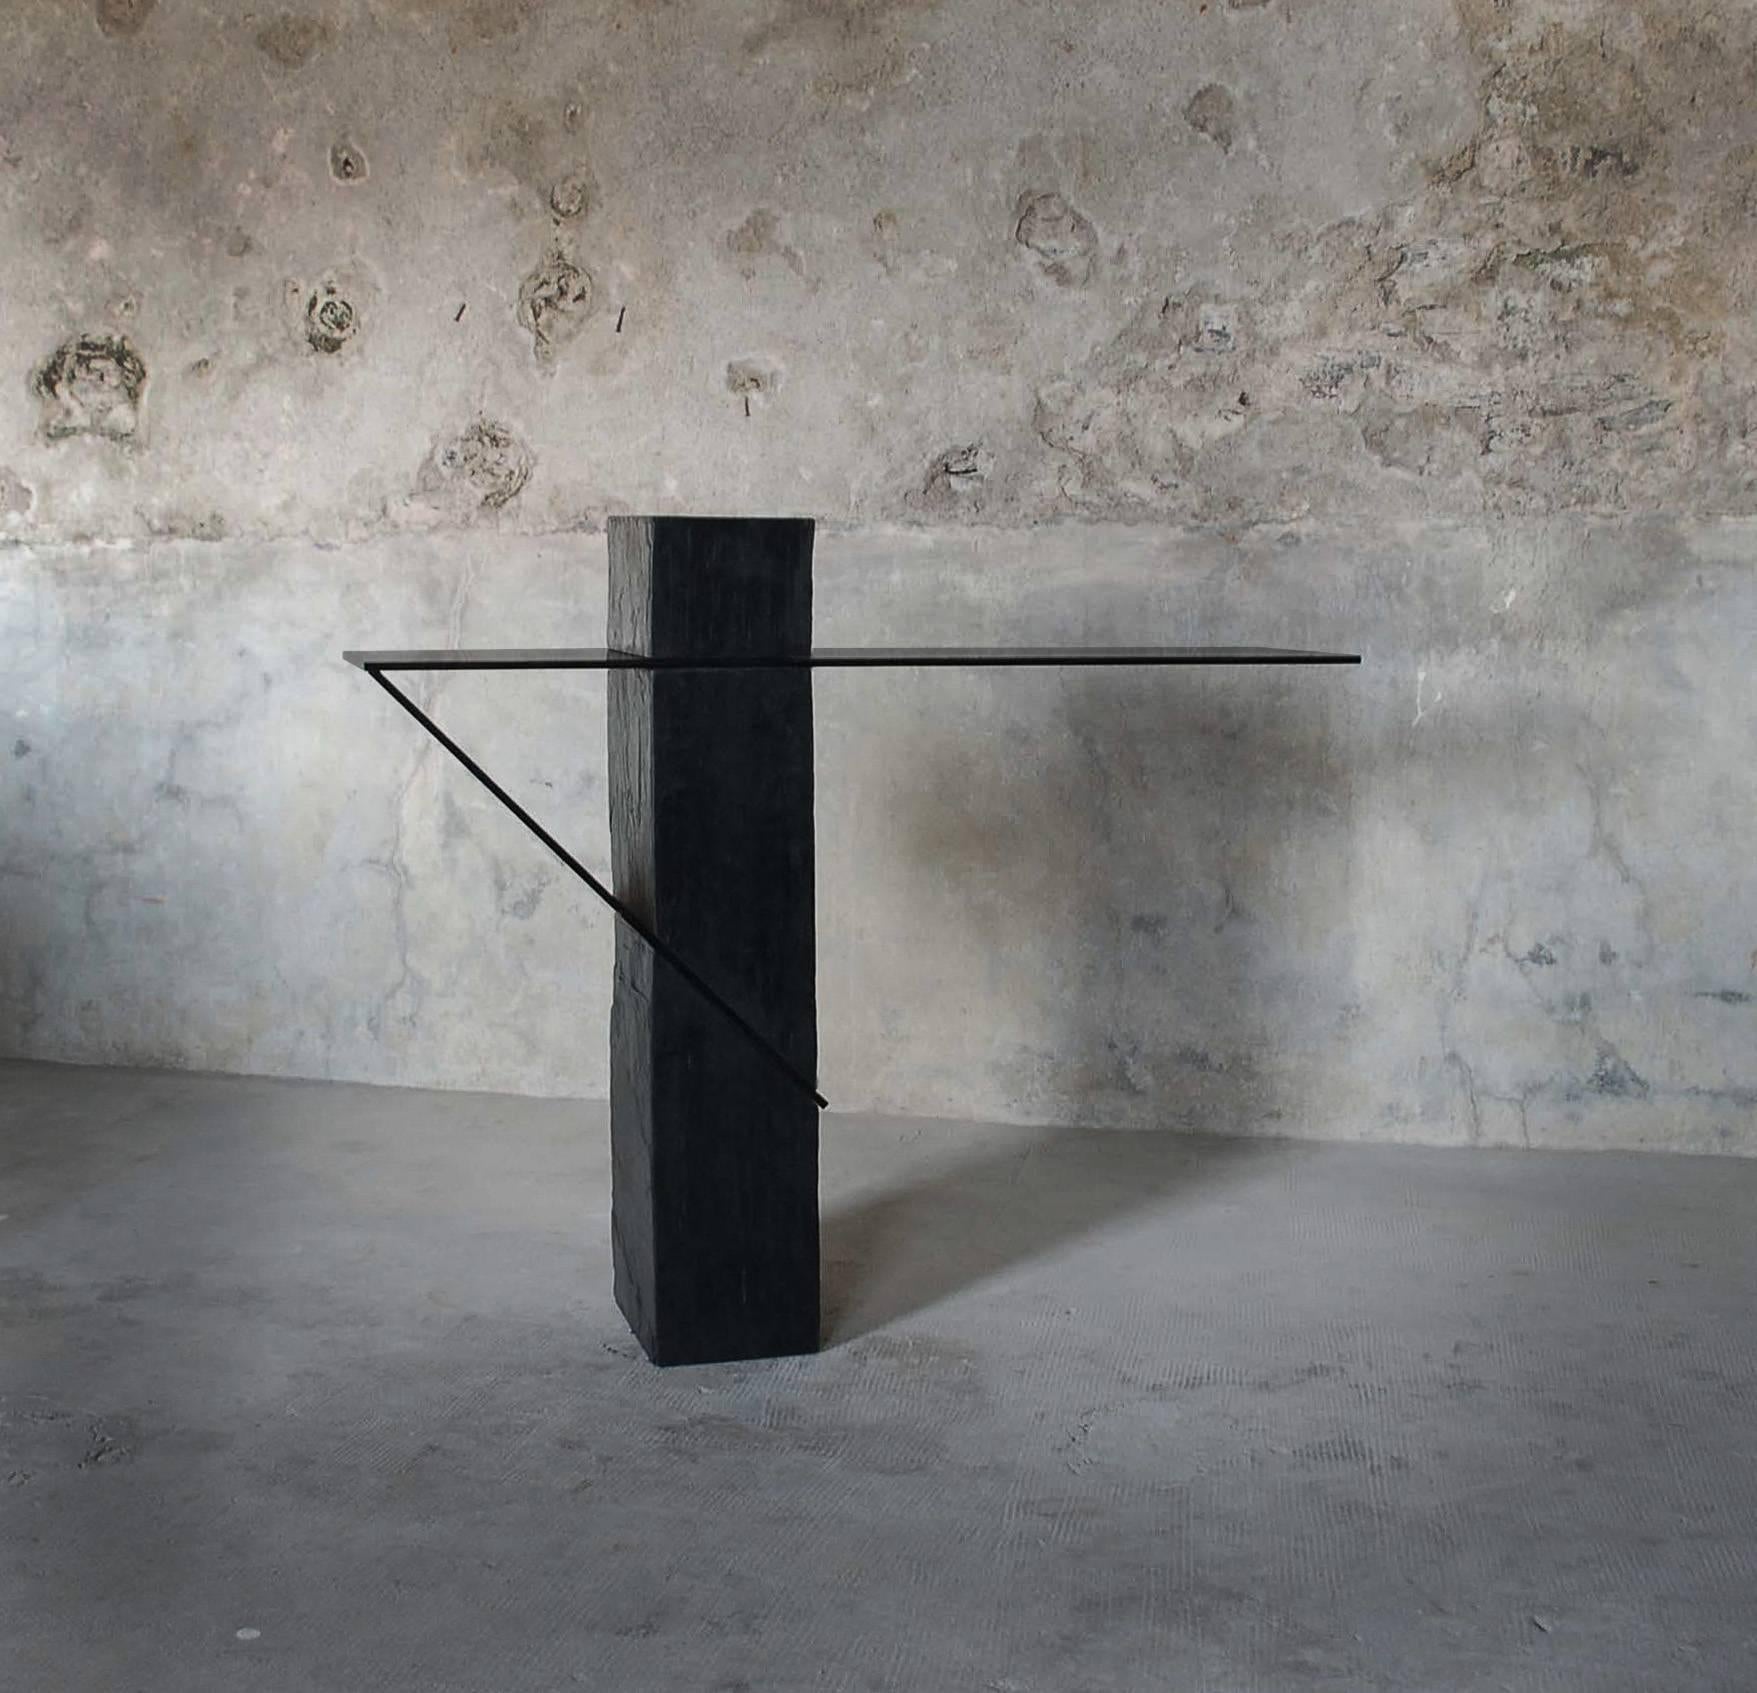 Athlétique console
Edition of 8
Frederic Saulou
Materials: Trélazé black slate, gray smoked glass.
Measures: Total length : 110 cm x W 25 cm x 105 cm
Base in slate : l 25 x L 18 x H 105 cm
Height Glass top: 90 cm

